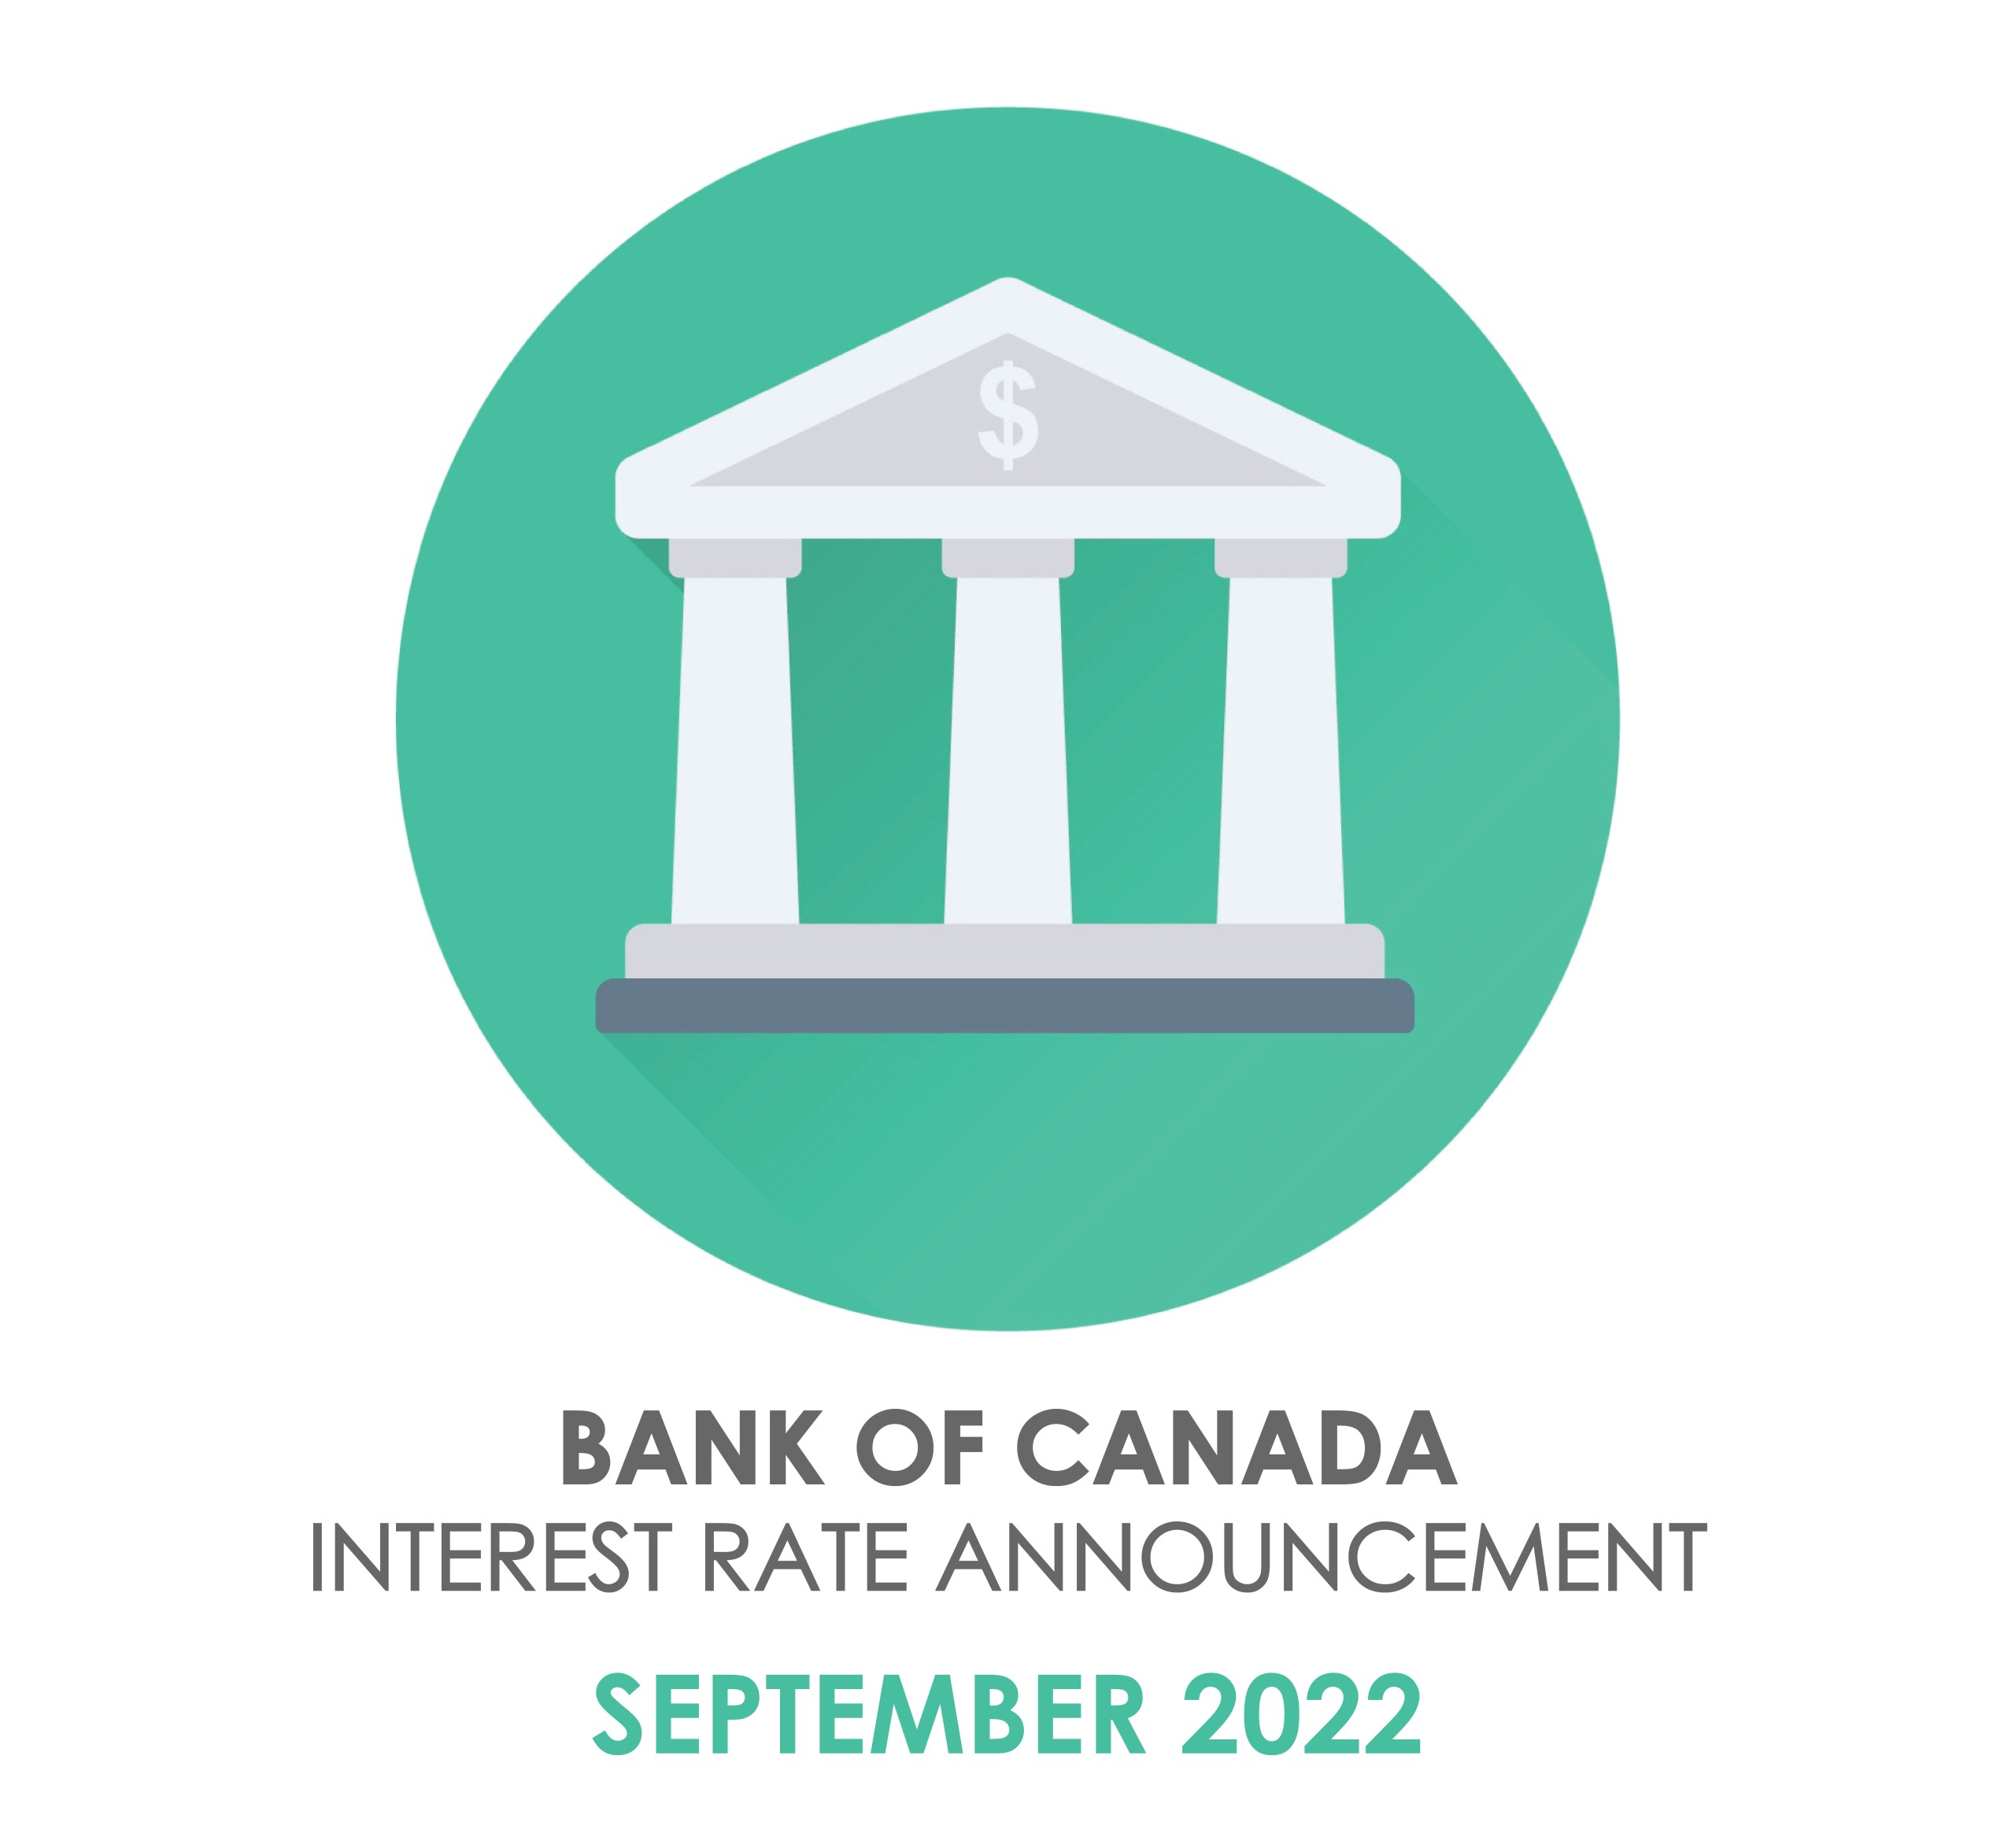 Bank of Canada Announcement Sept 2022